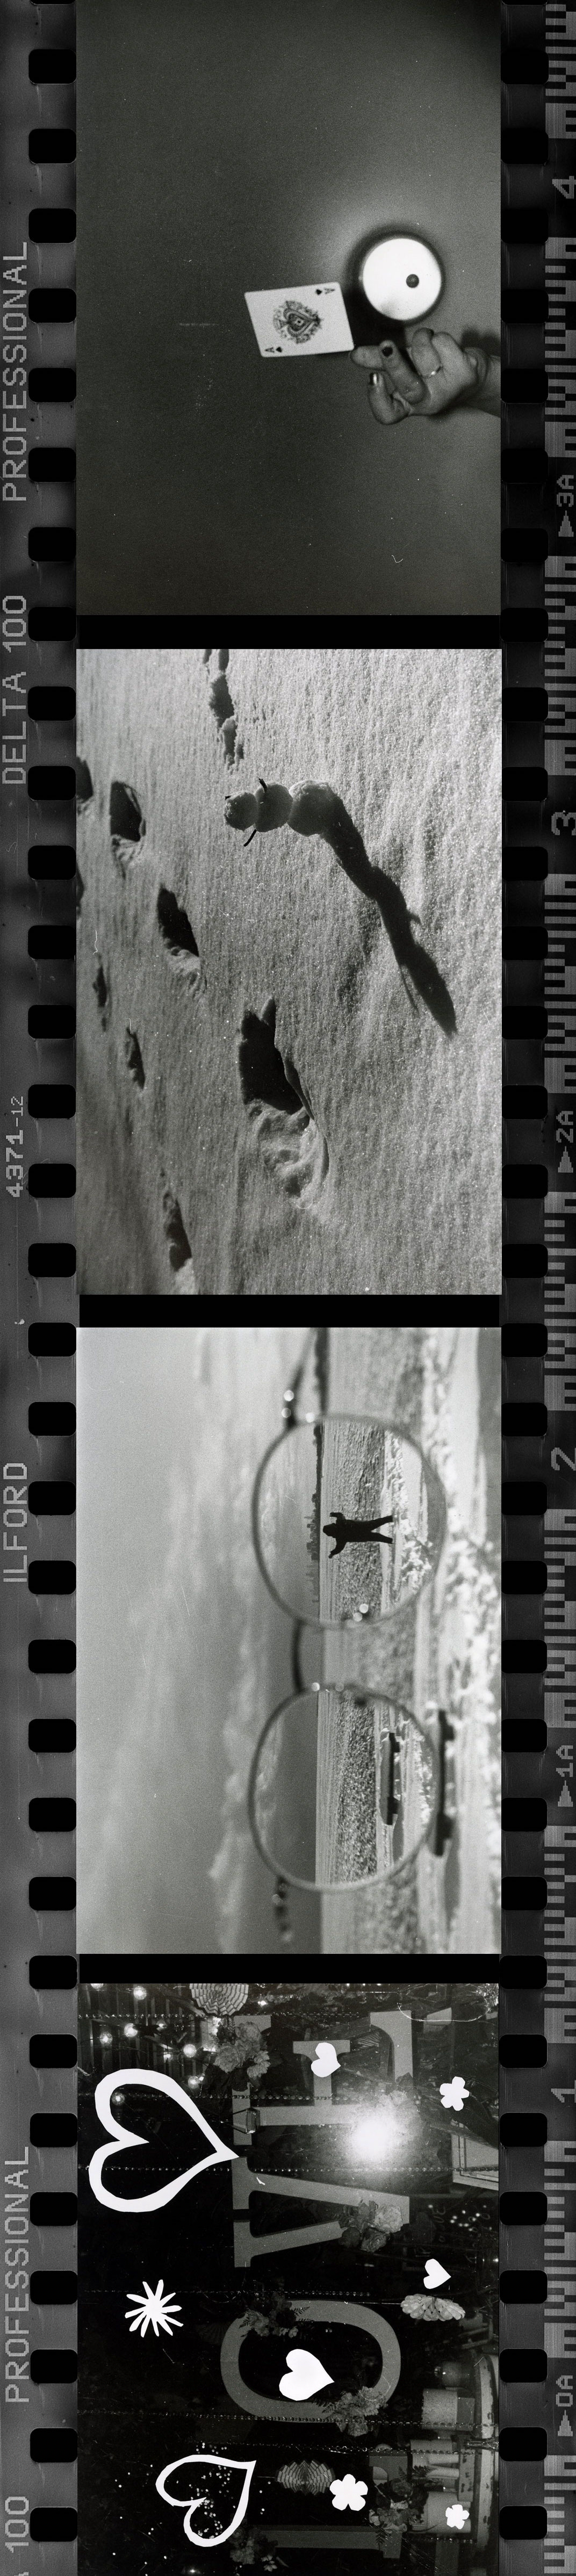 A film roll of black and white photos taken by Joy: a hand holding a playing card, a small snowman in the snow, a pair of glasses through which a standing person is seen and a sign that says 'LOVE' with hearts surrounding it.